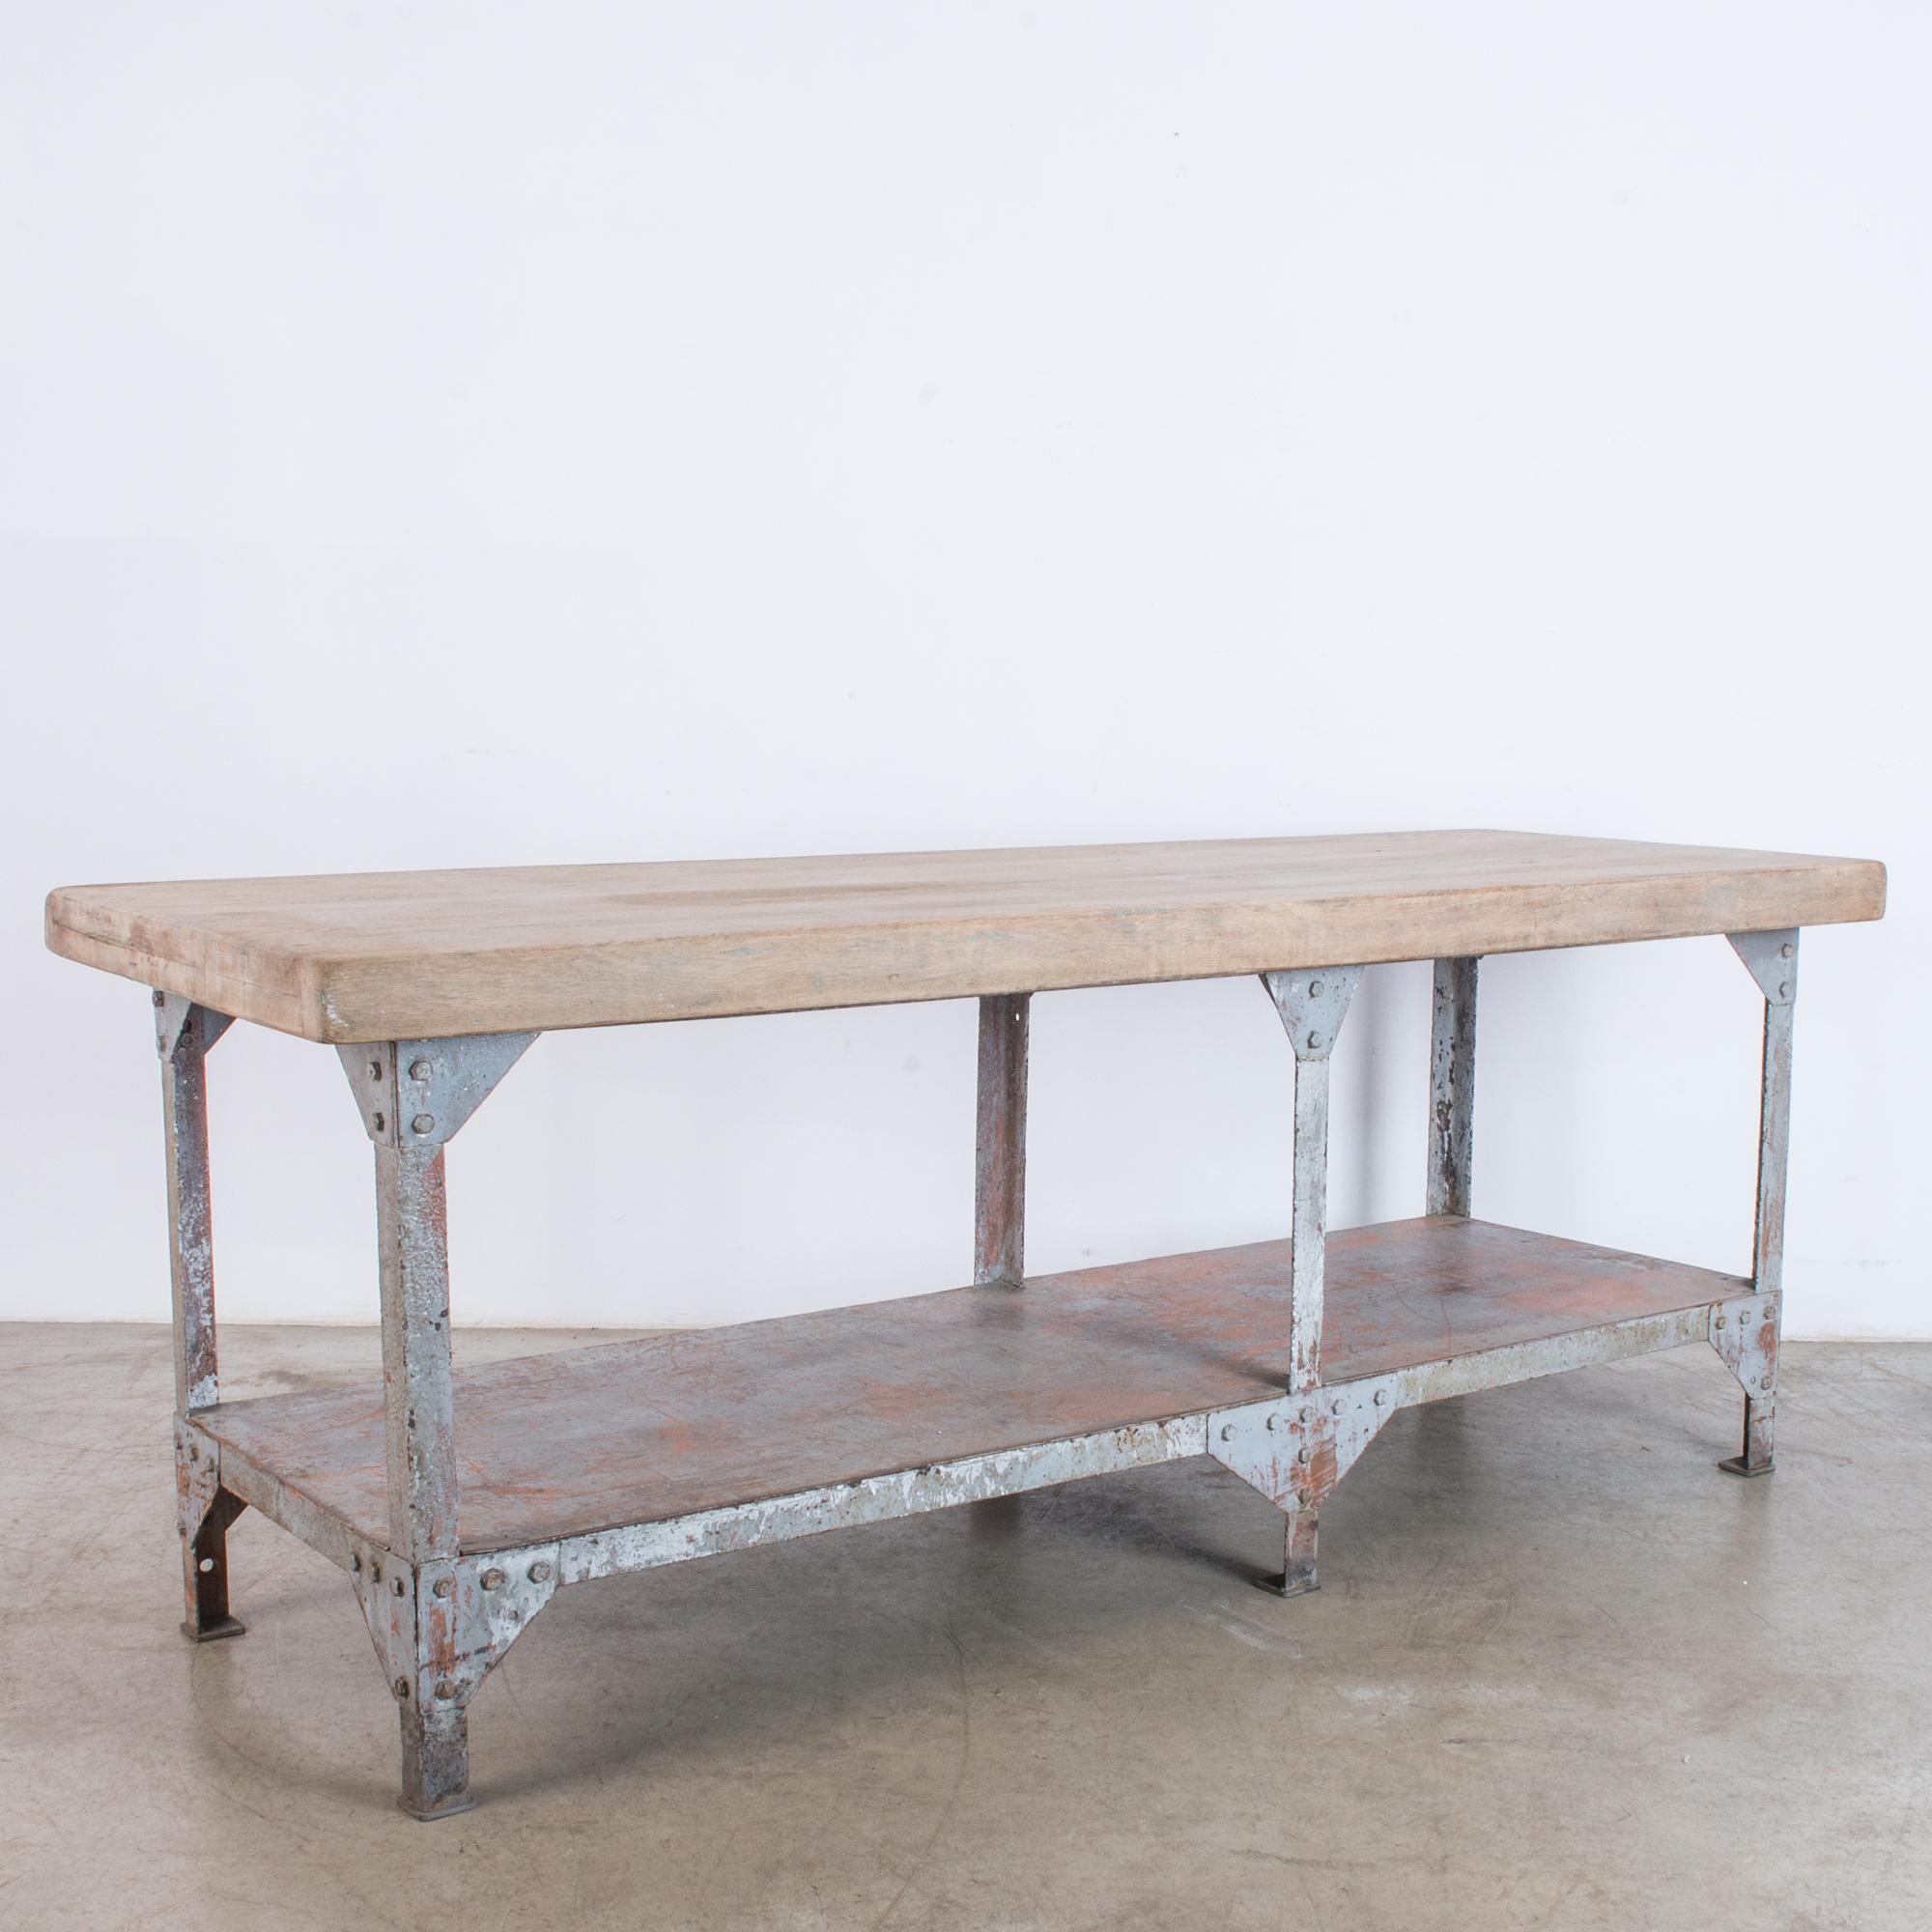 French Provincial 1950s French Industrial Work Table